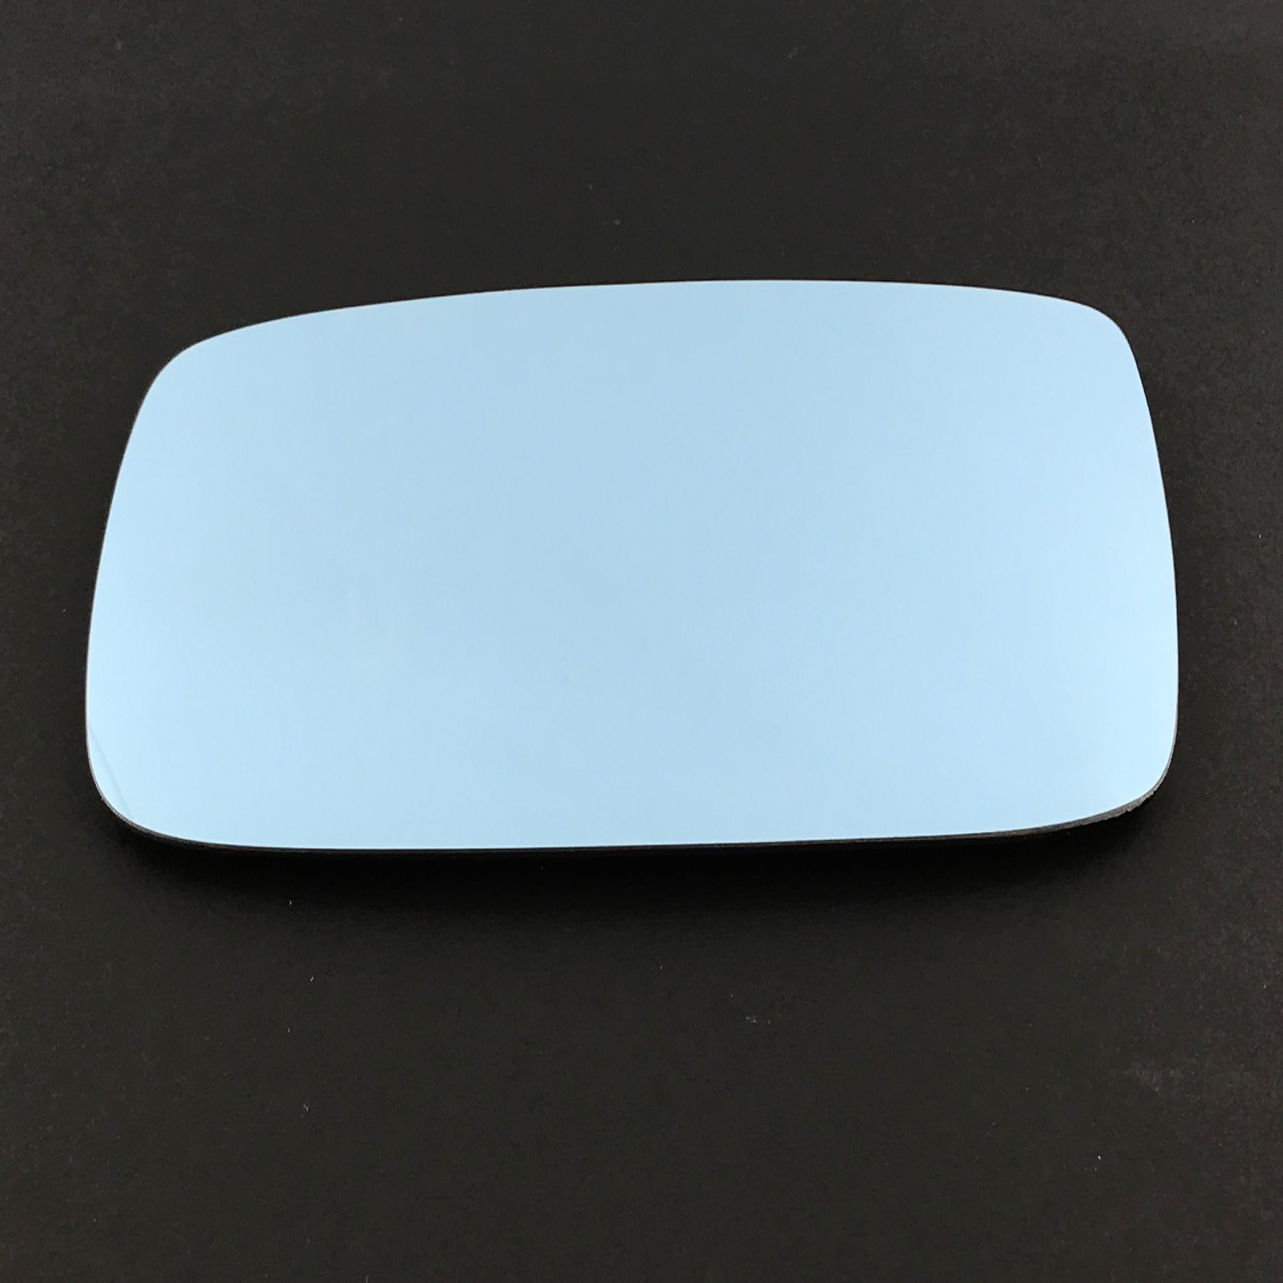 Volvo 760 Wing Mirror Glass RIGHT HAND ( UK Driver Side ) 1984 to 1992 – Convex Wing Mirror ( Blue Tinted )